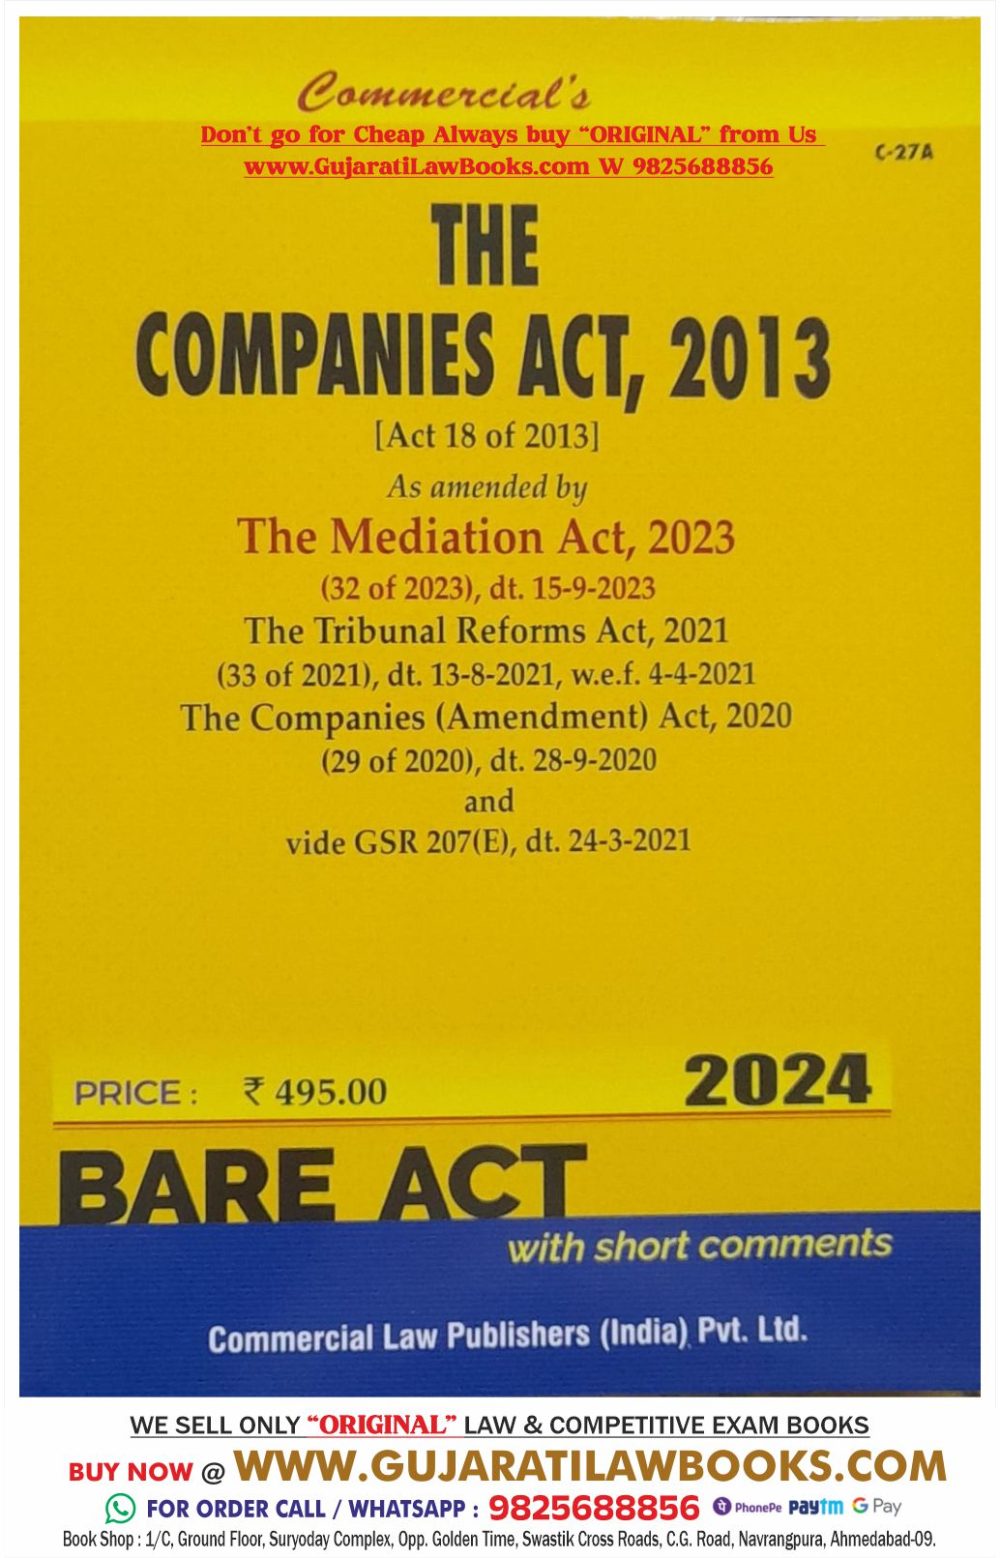 Companies Act, 2013 - BARE ACT - Latest 2024 Edition Commercial's Original